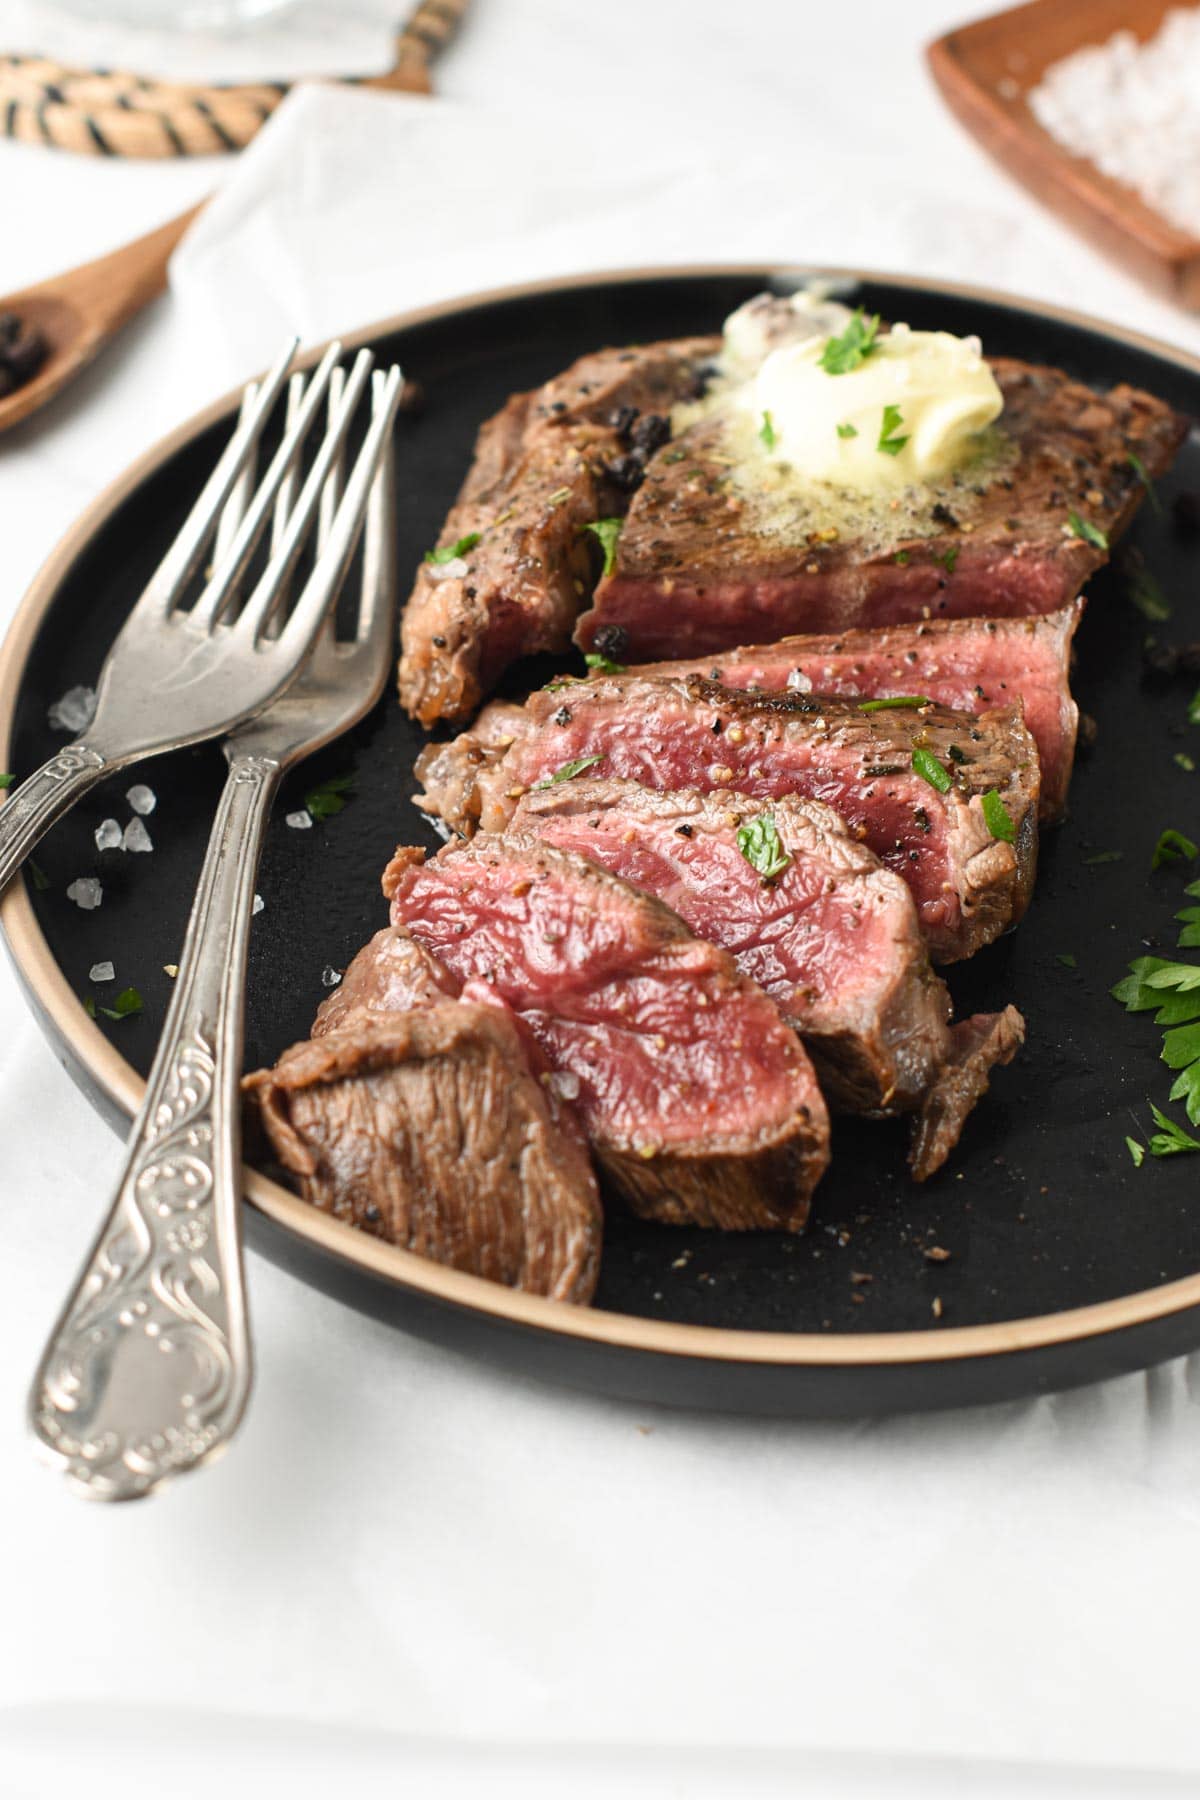 3 ingredient Steak Marinade on a cooked steak on a dark plate with silver forks.